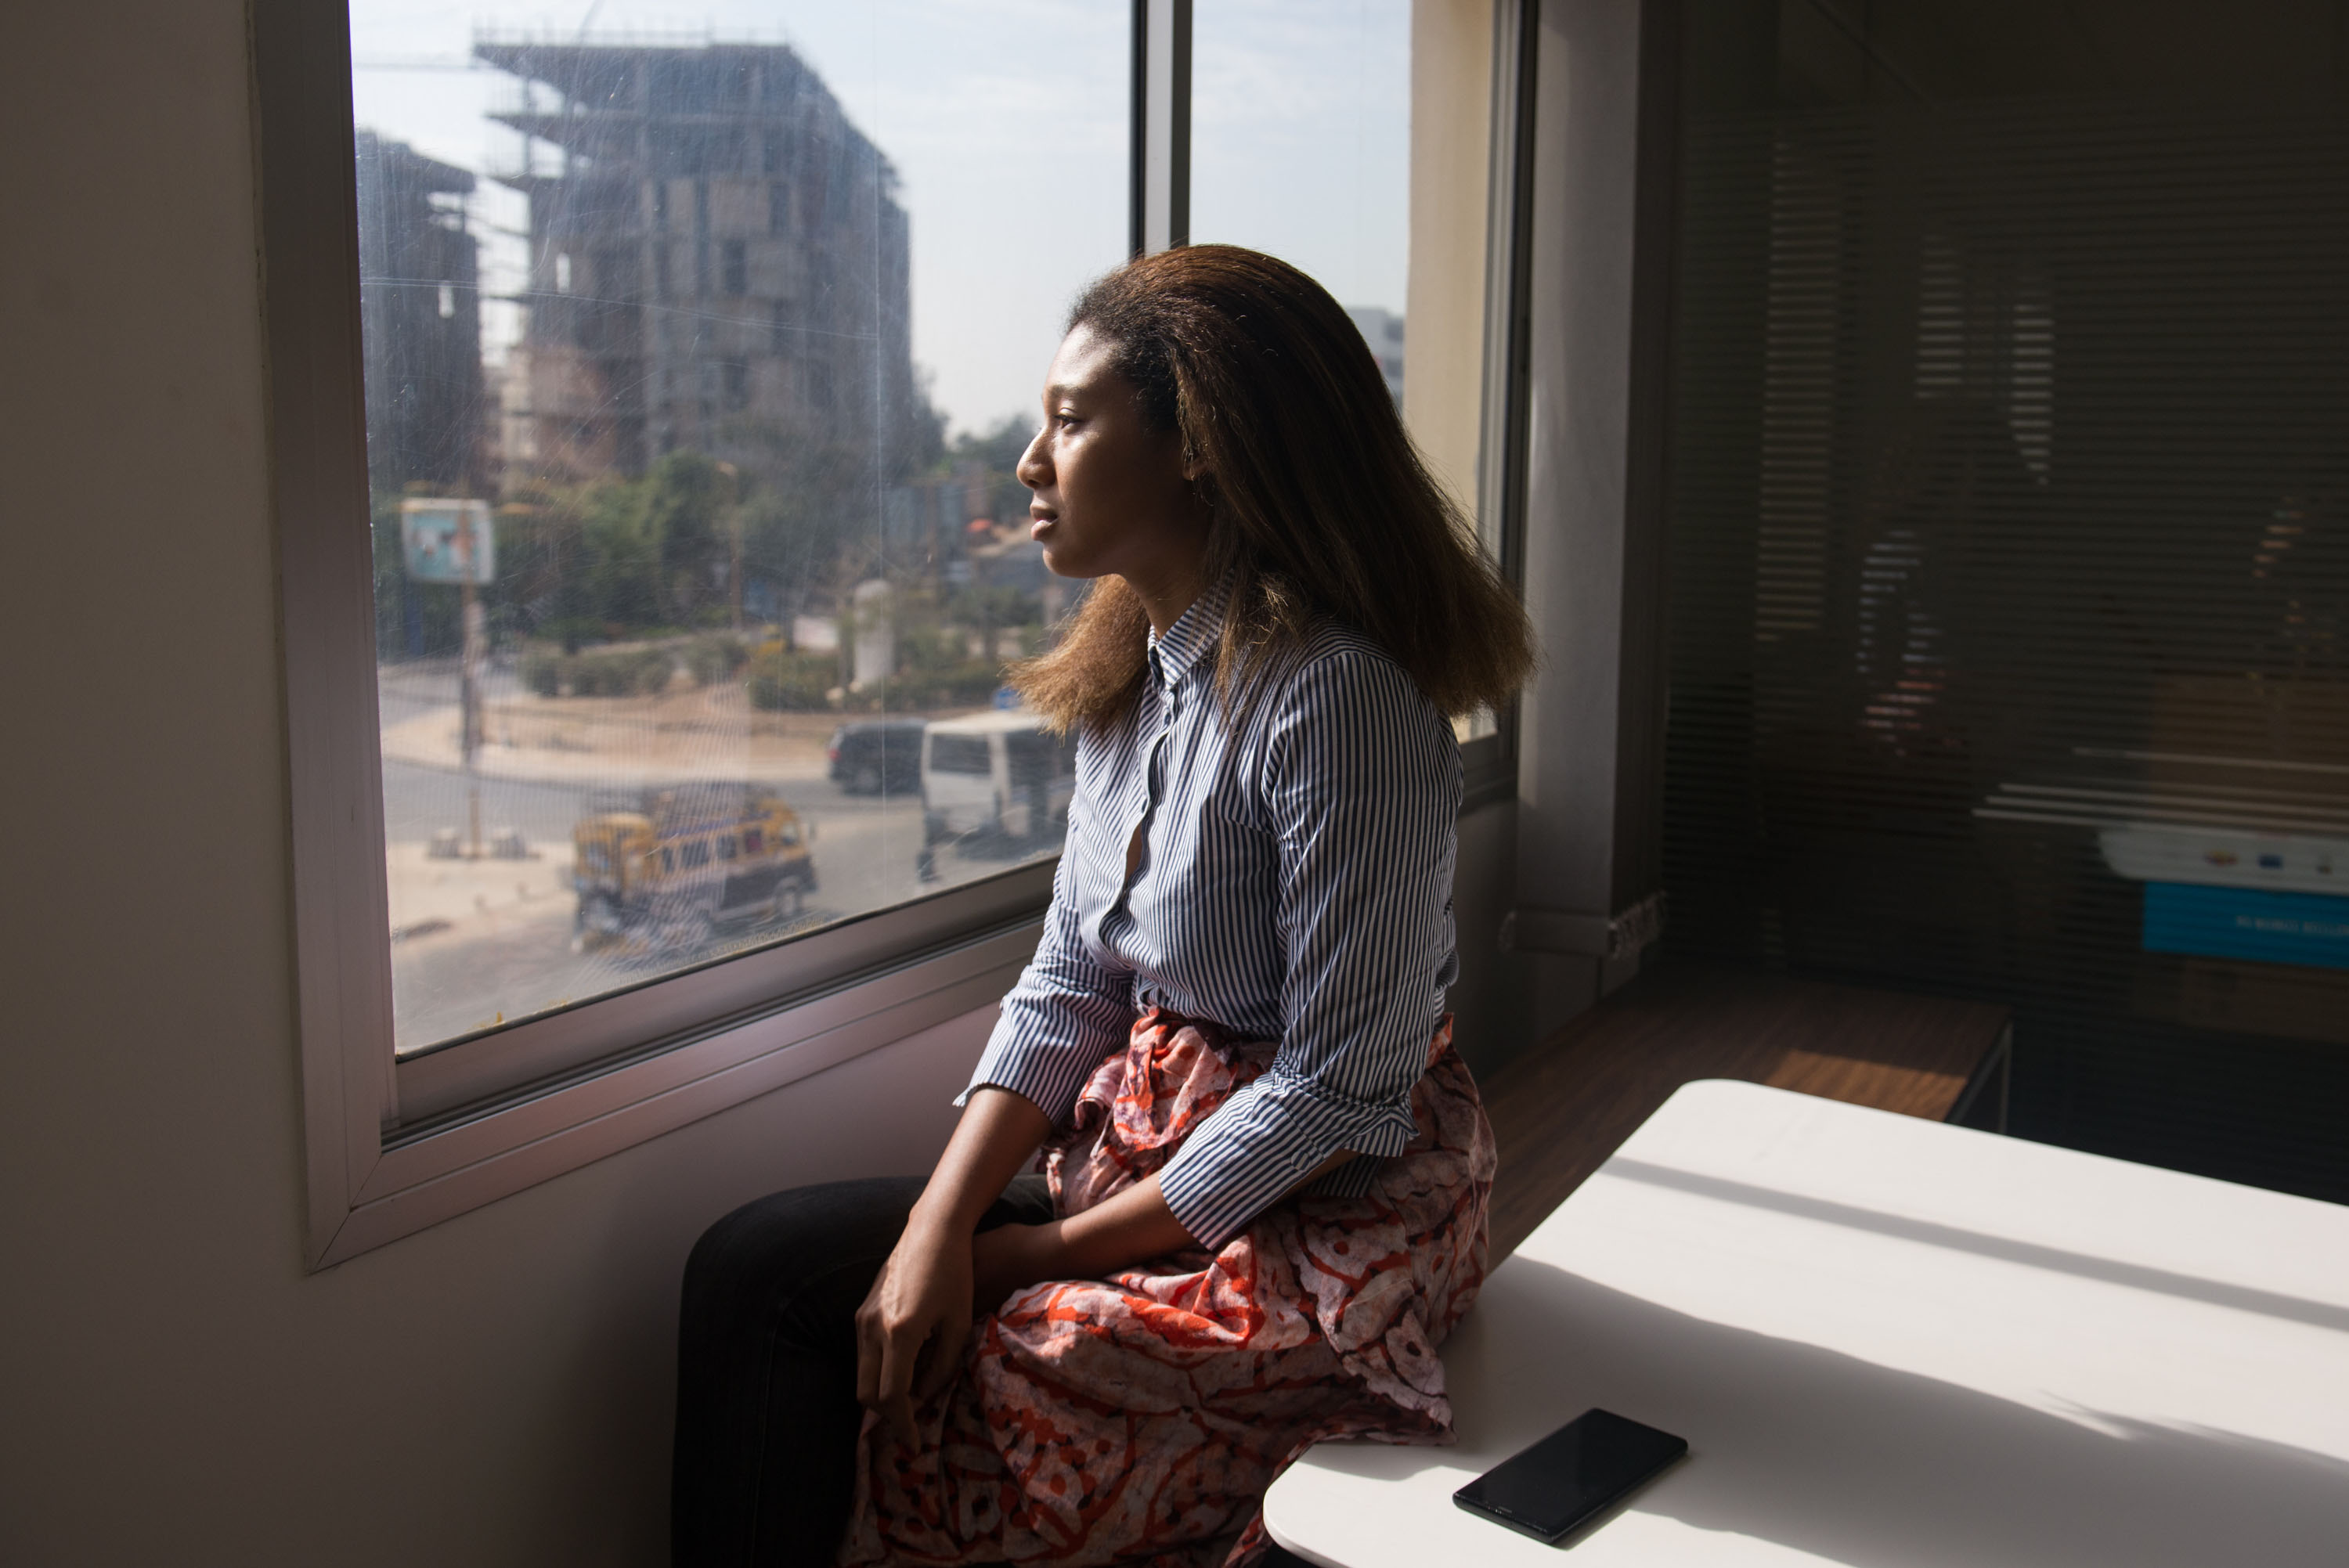 Olivia Codou photographed in the Dakar office she shares with other startup entrepreneurs.